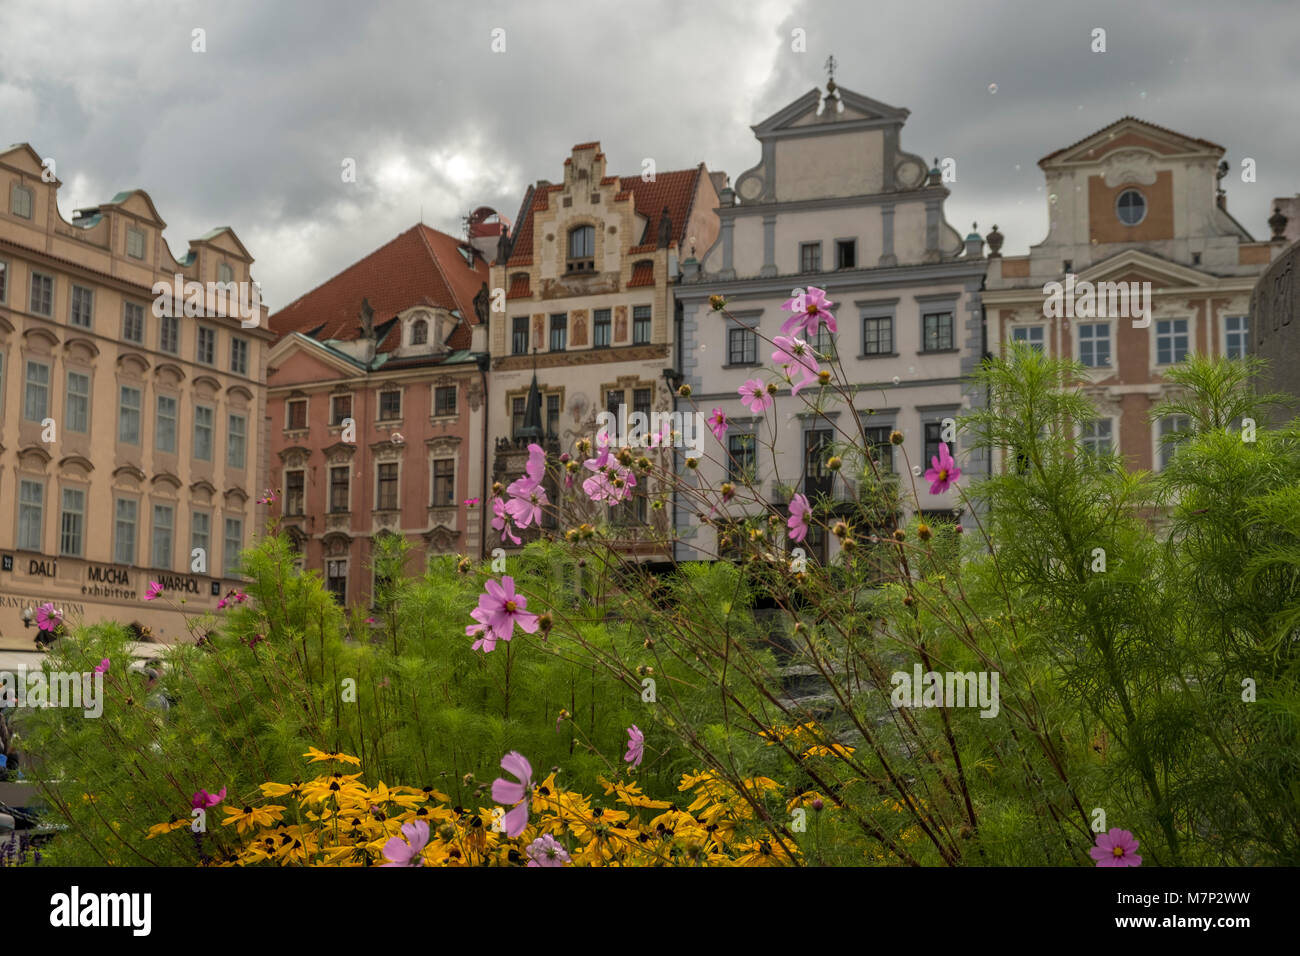 Flowers by Jan Hus Monument and ornate buildings in Old Town Square, Prague Stock Photo